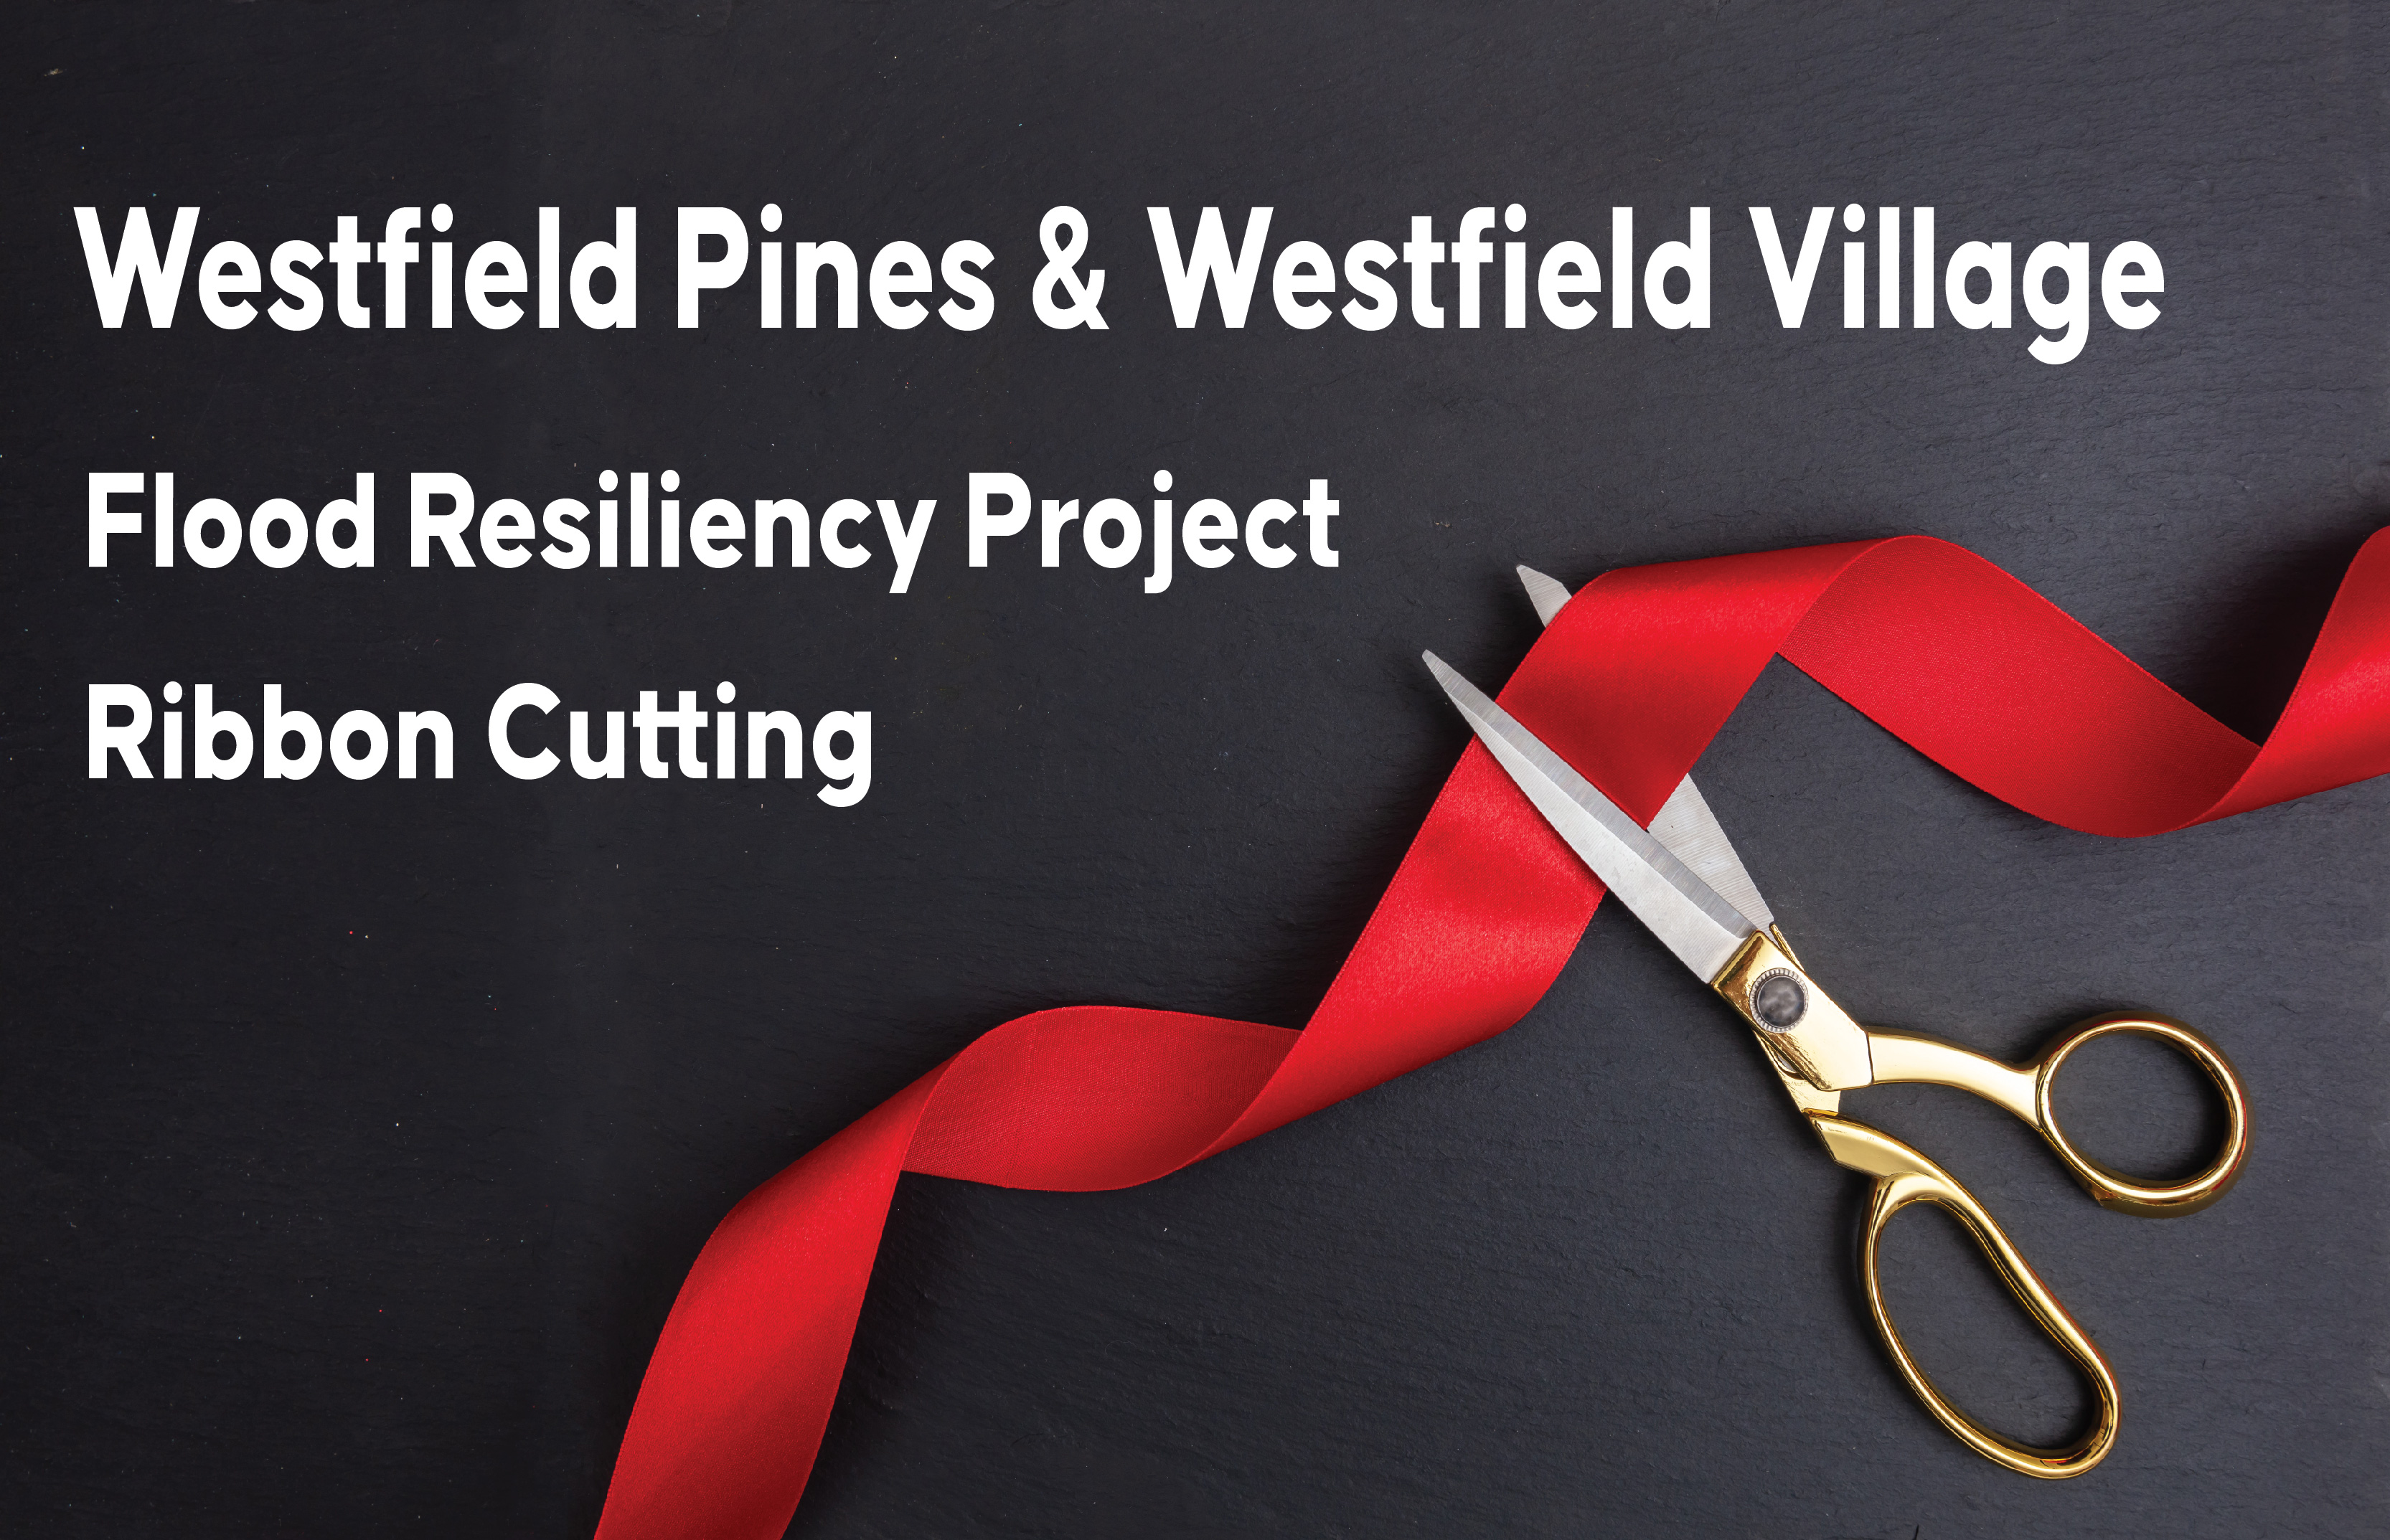 Commissioner Lesley Briones Announces Completion of Westfield Pines and Westfield Village Flood Resiliency Project